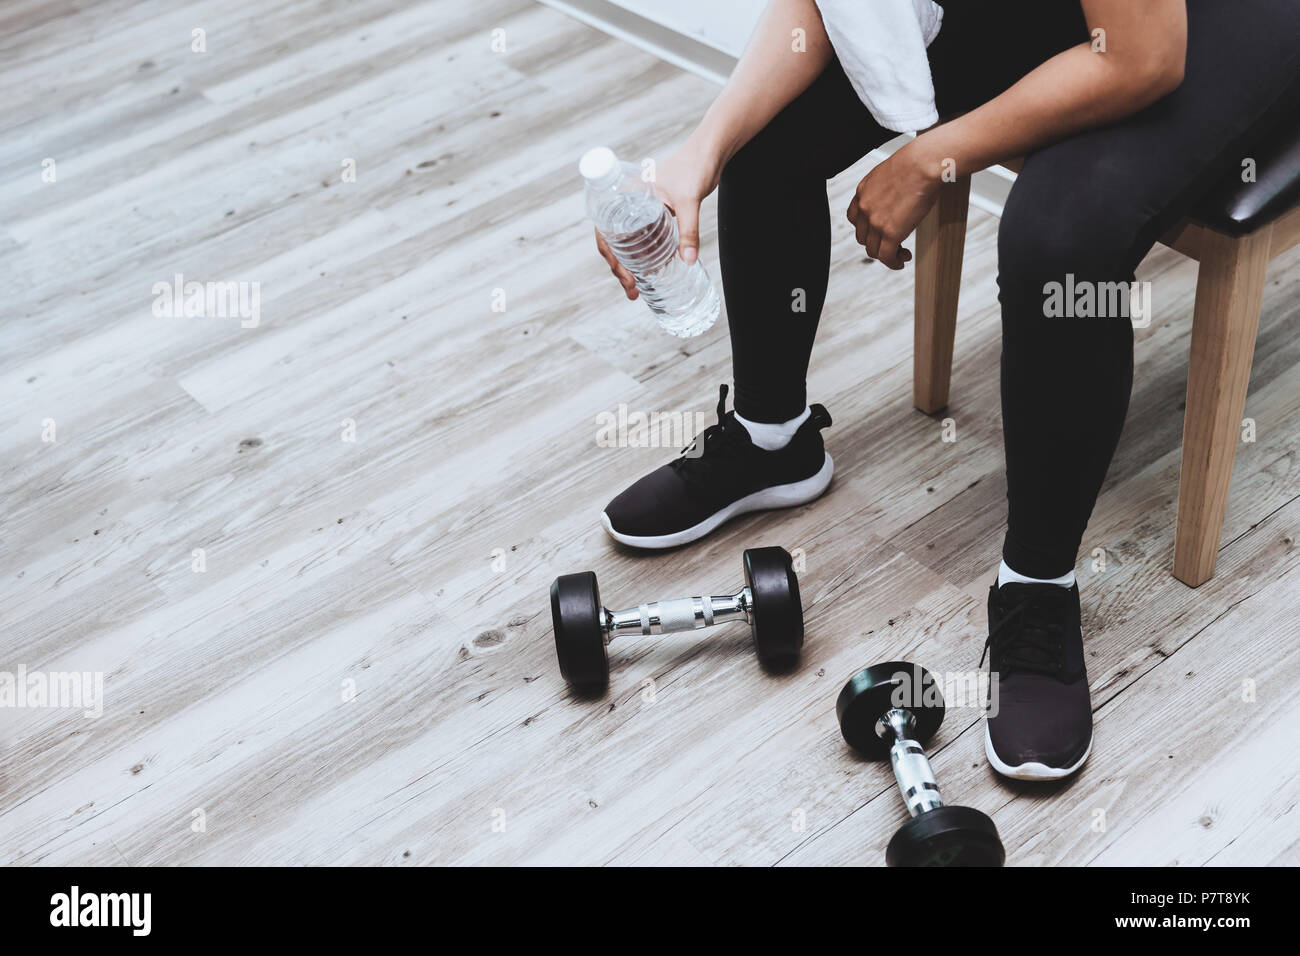 Fitness girl break for drinking water sitting with dumbbells weight training with copyspace Stock Photo